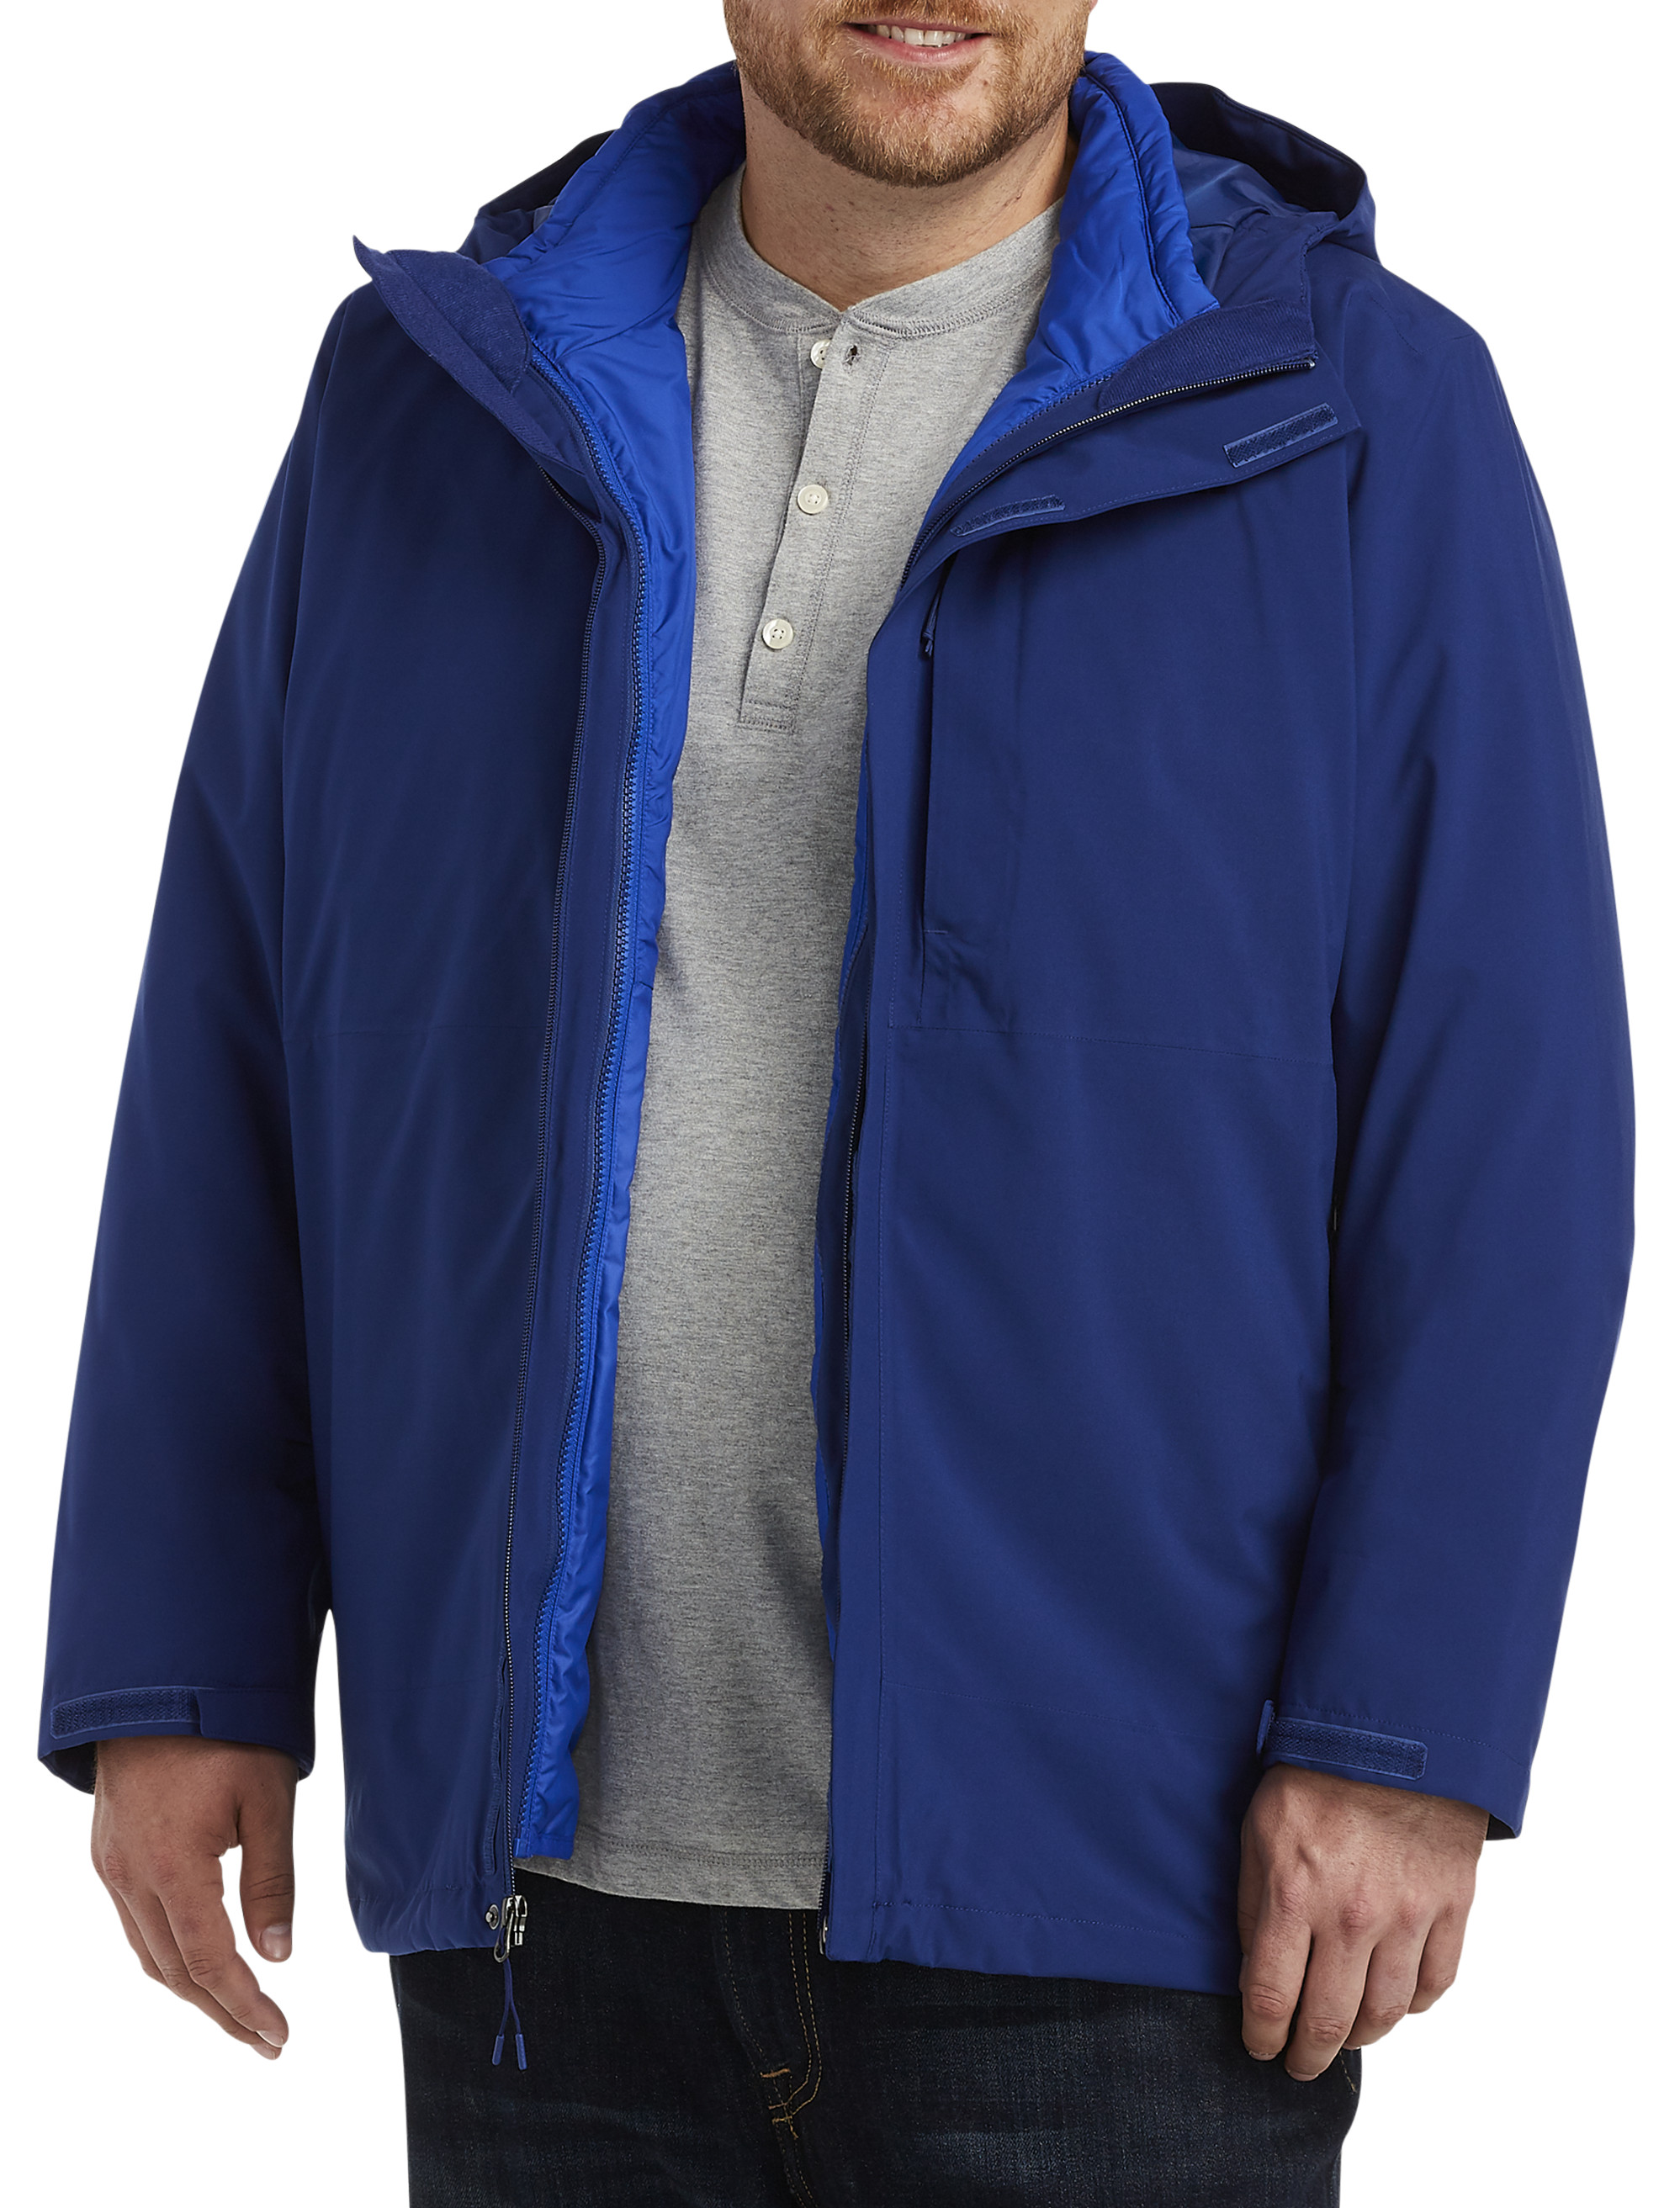 north face 2xlt